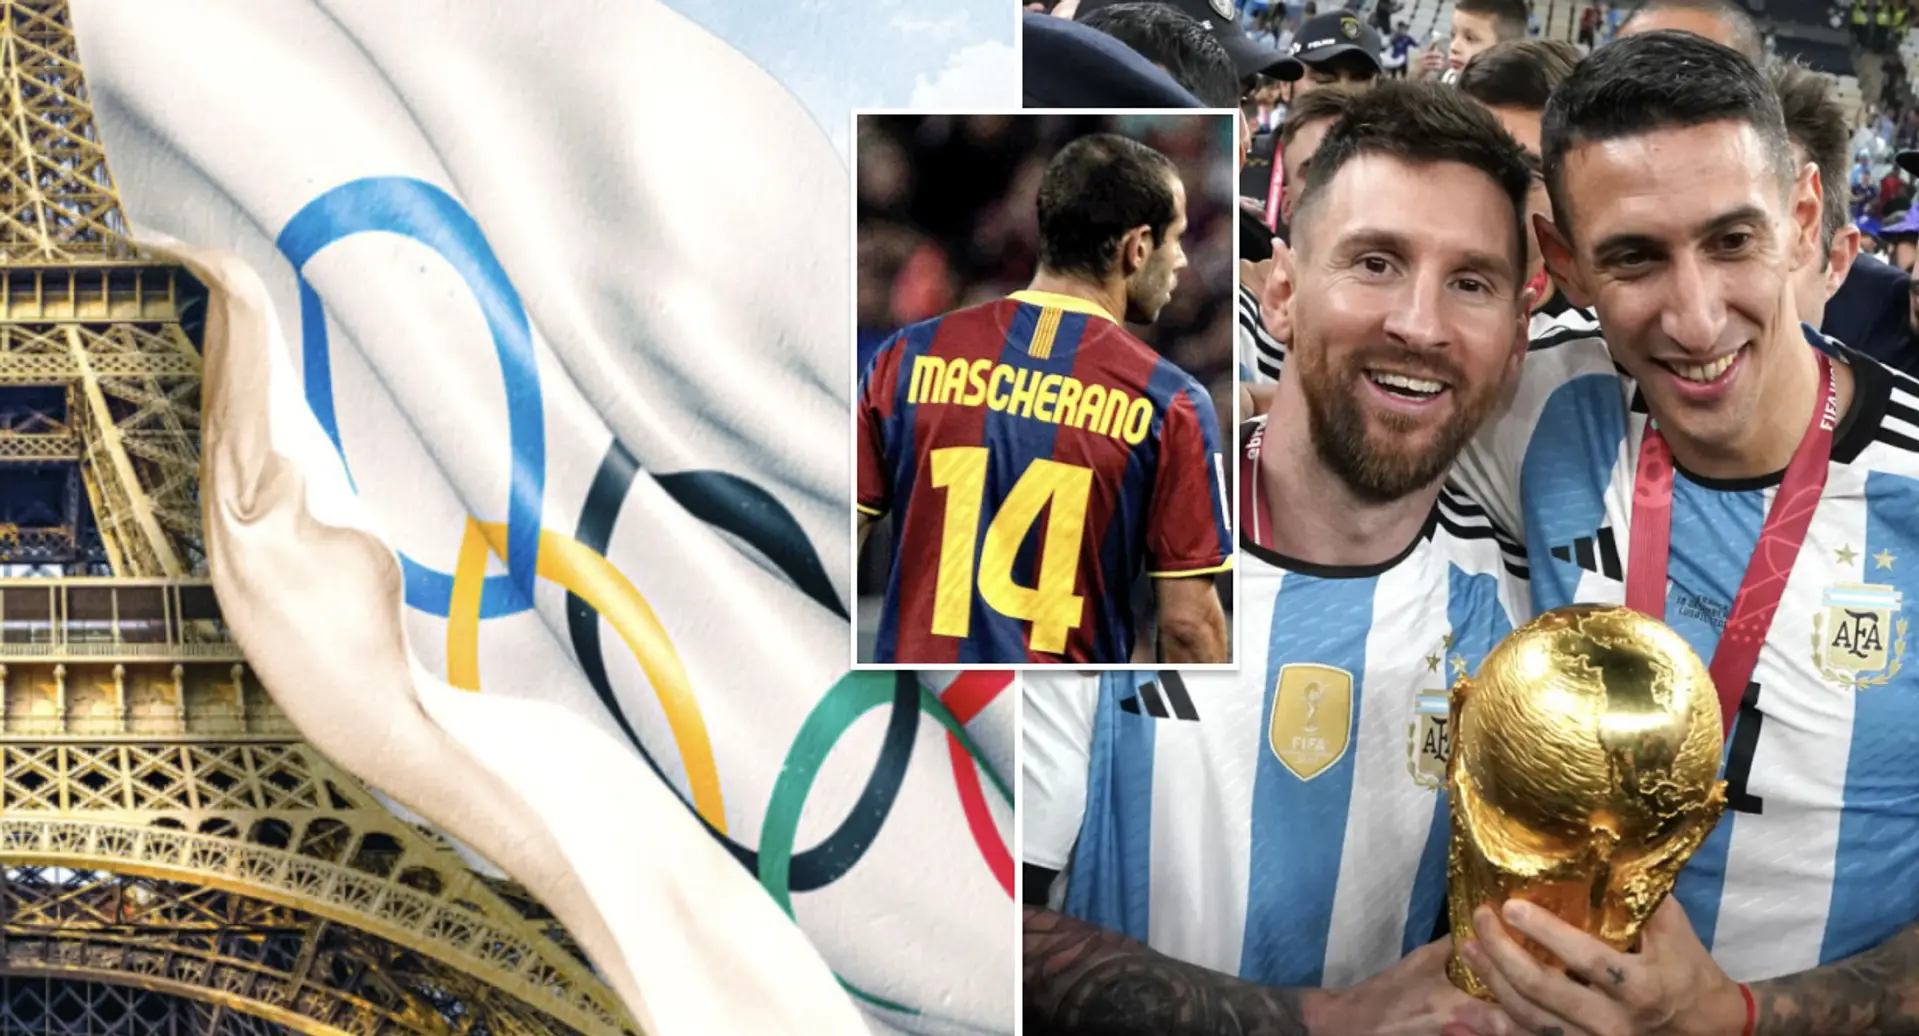 Mascherano invites Messi and Di Maria to Olympics — can they actually play in Paris?